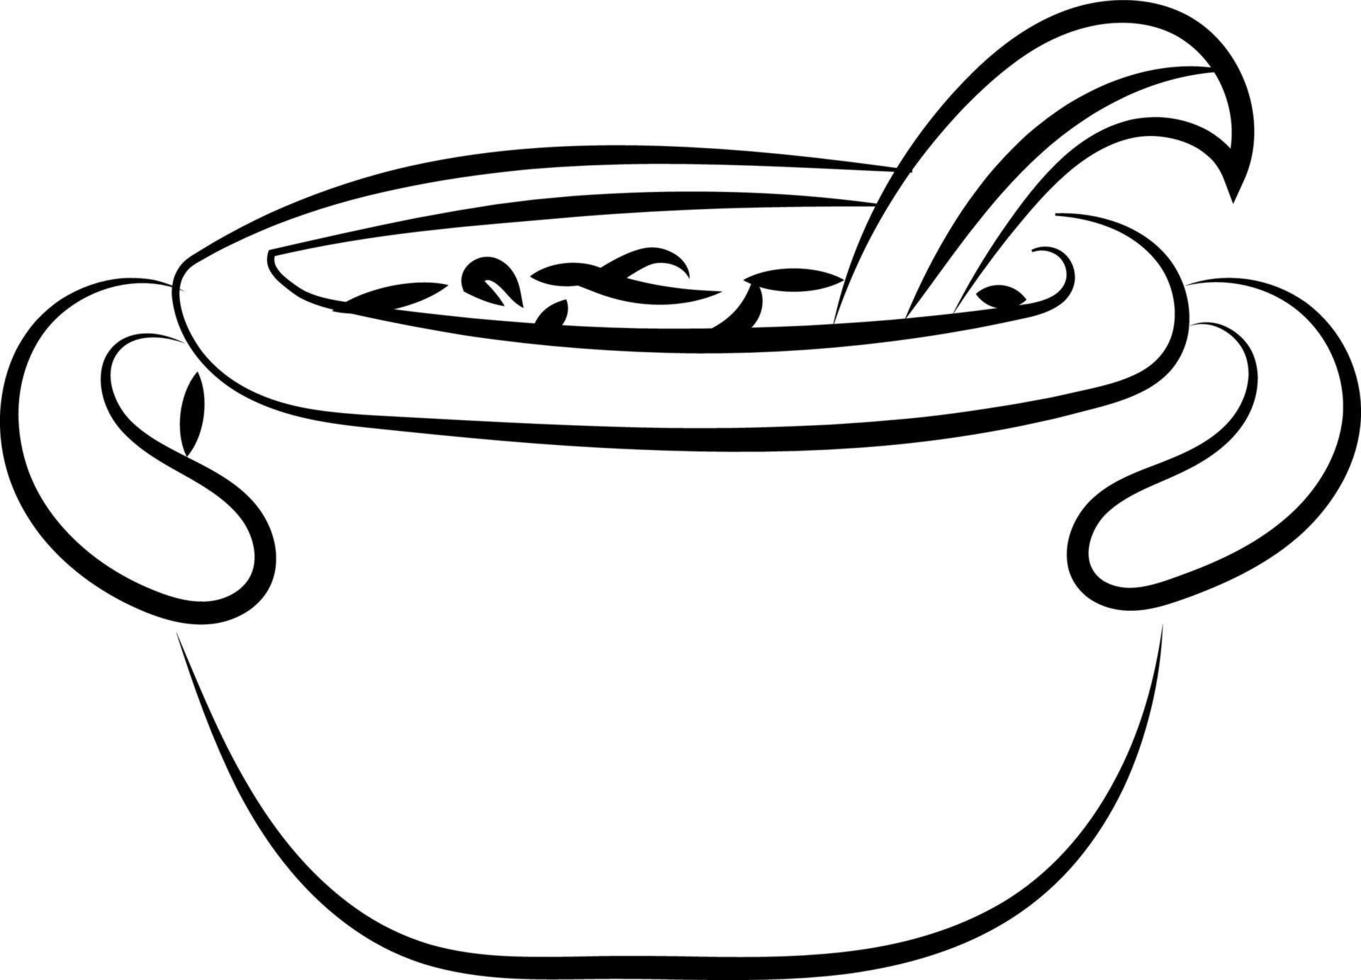 Pot with soup drawing, illustration, vector on white background